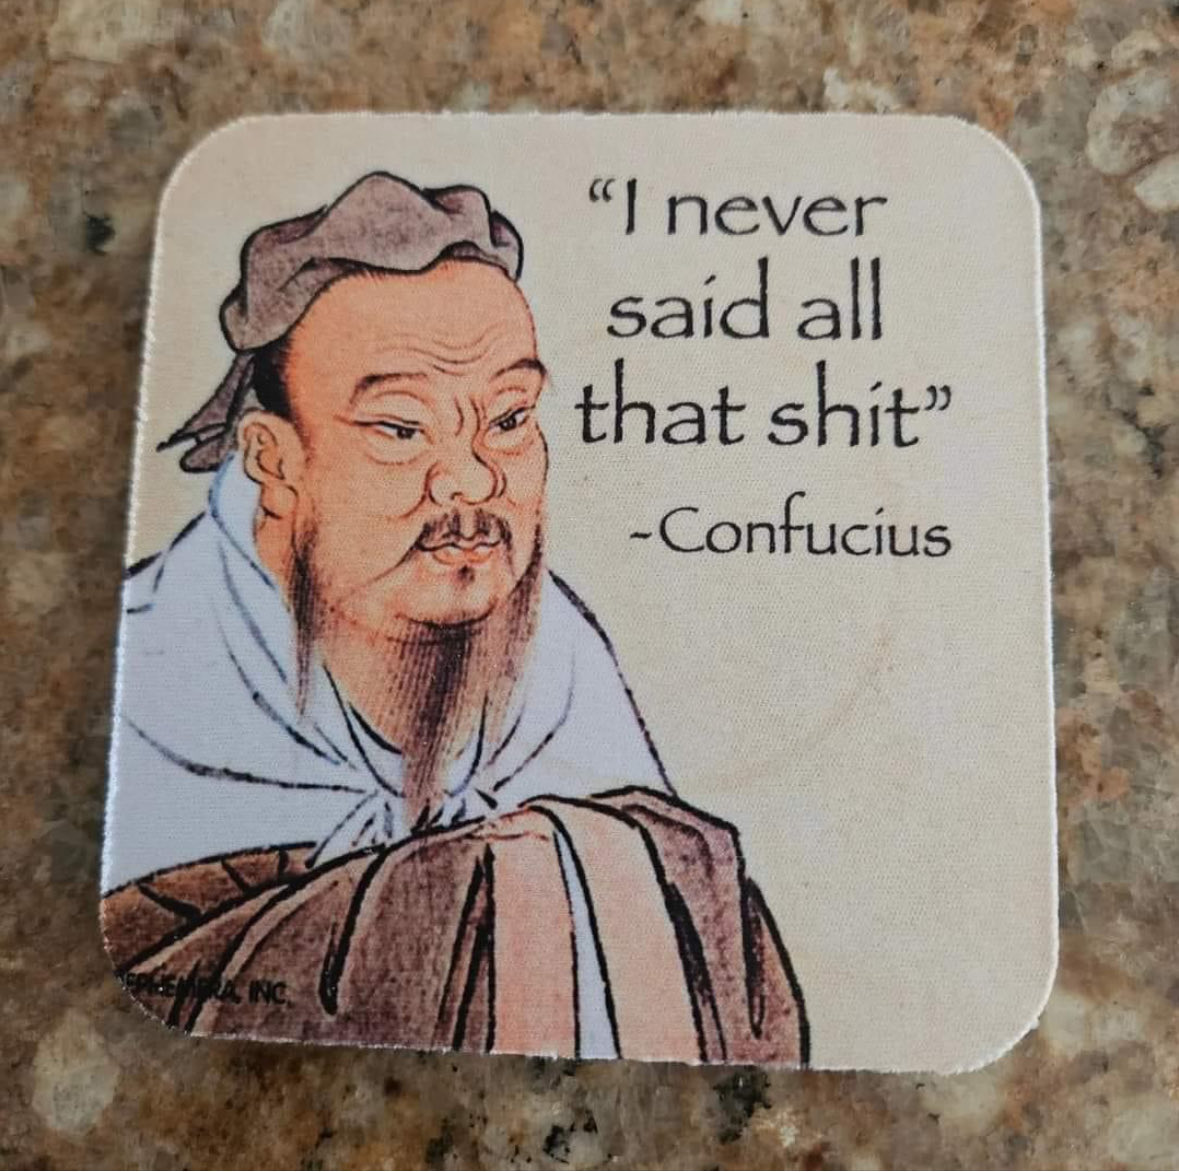 #Confucius says: Nuh-uh. Not true. Not at all. 😂⬇️